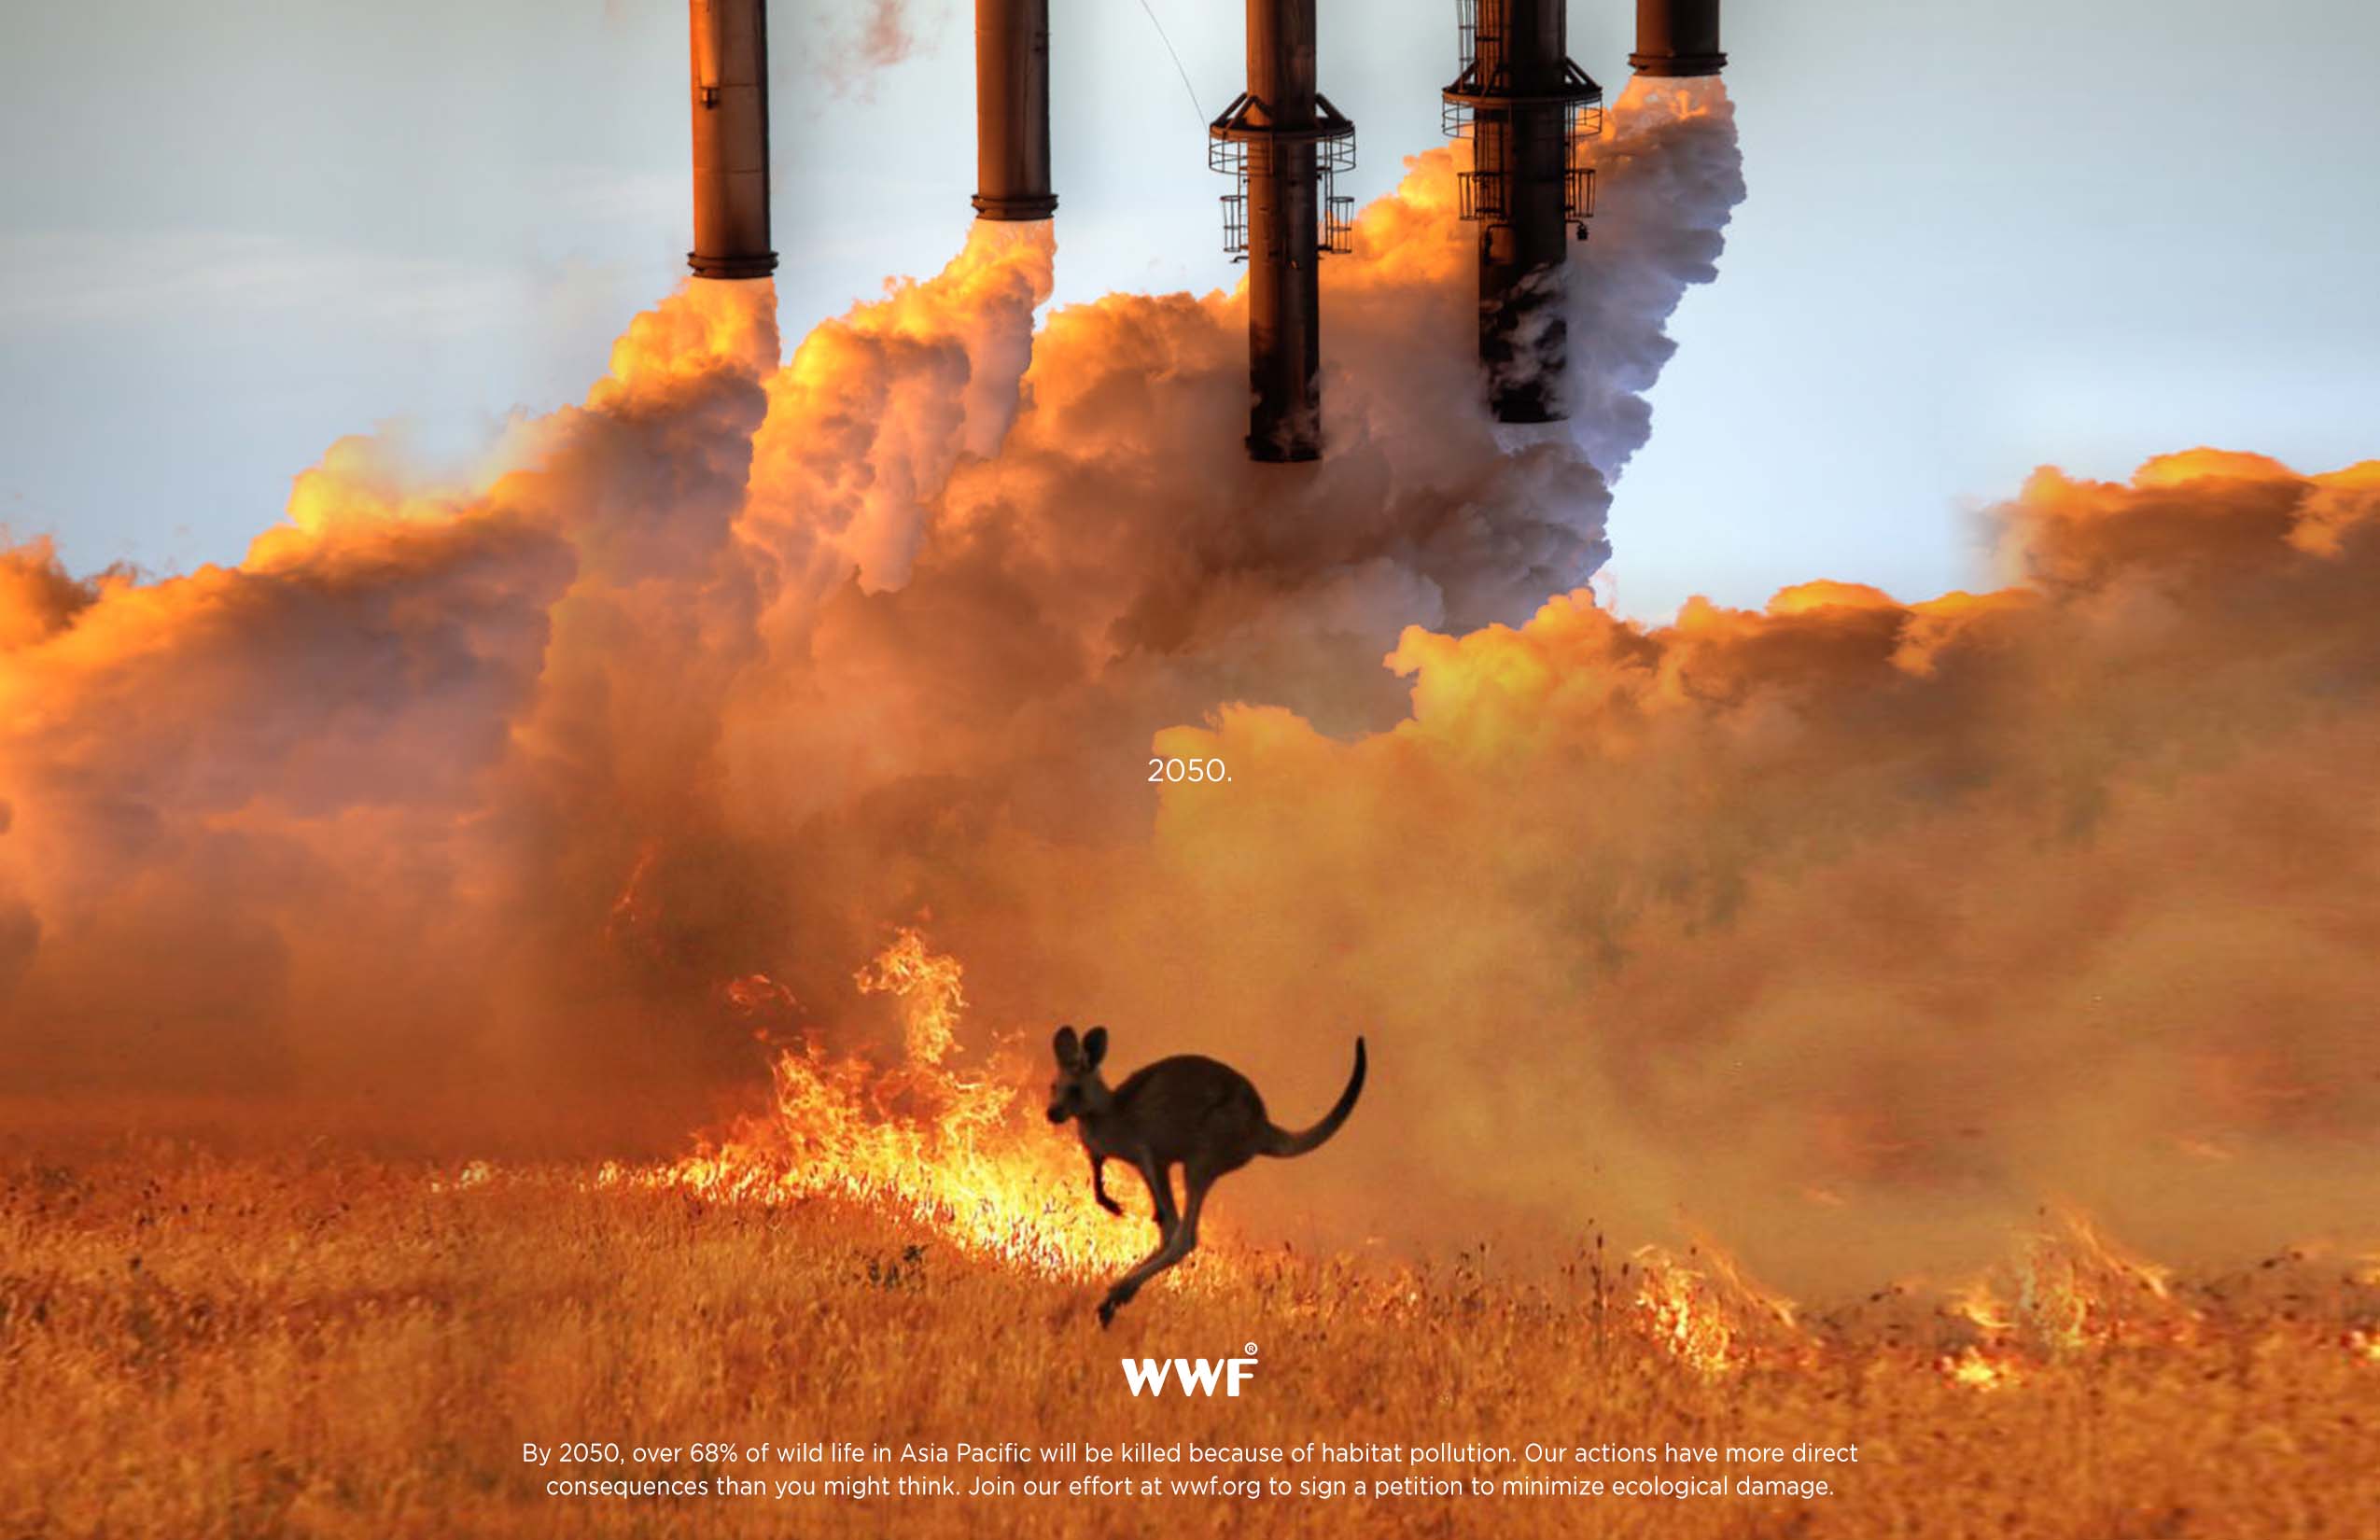 A kangaroo hops in a burning grassland while smoke stacks produce pollution in the background.